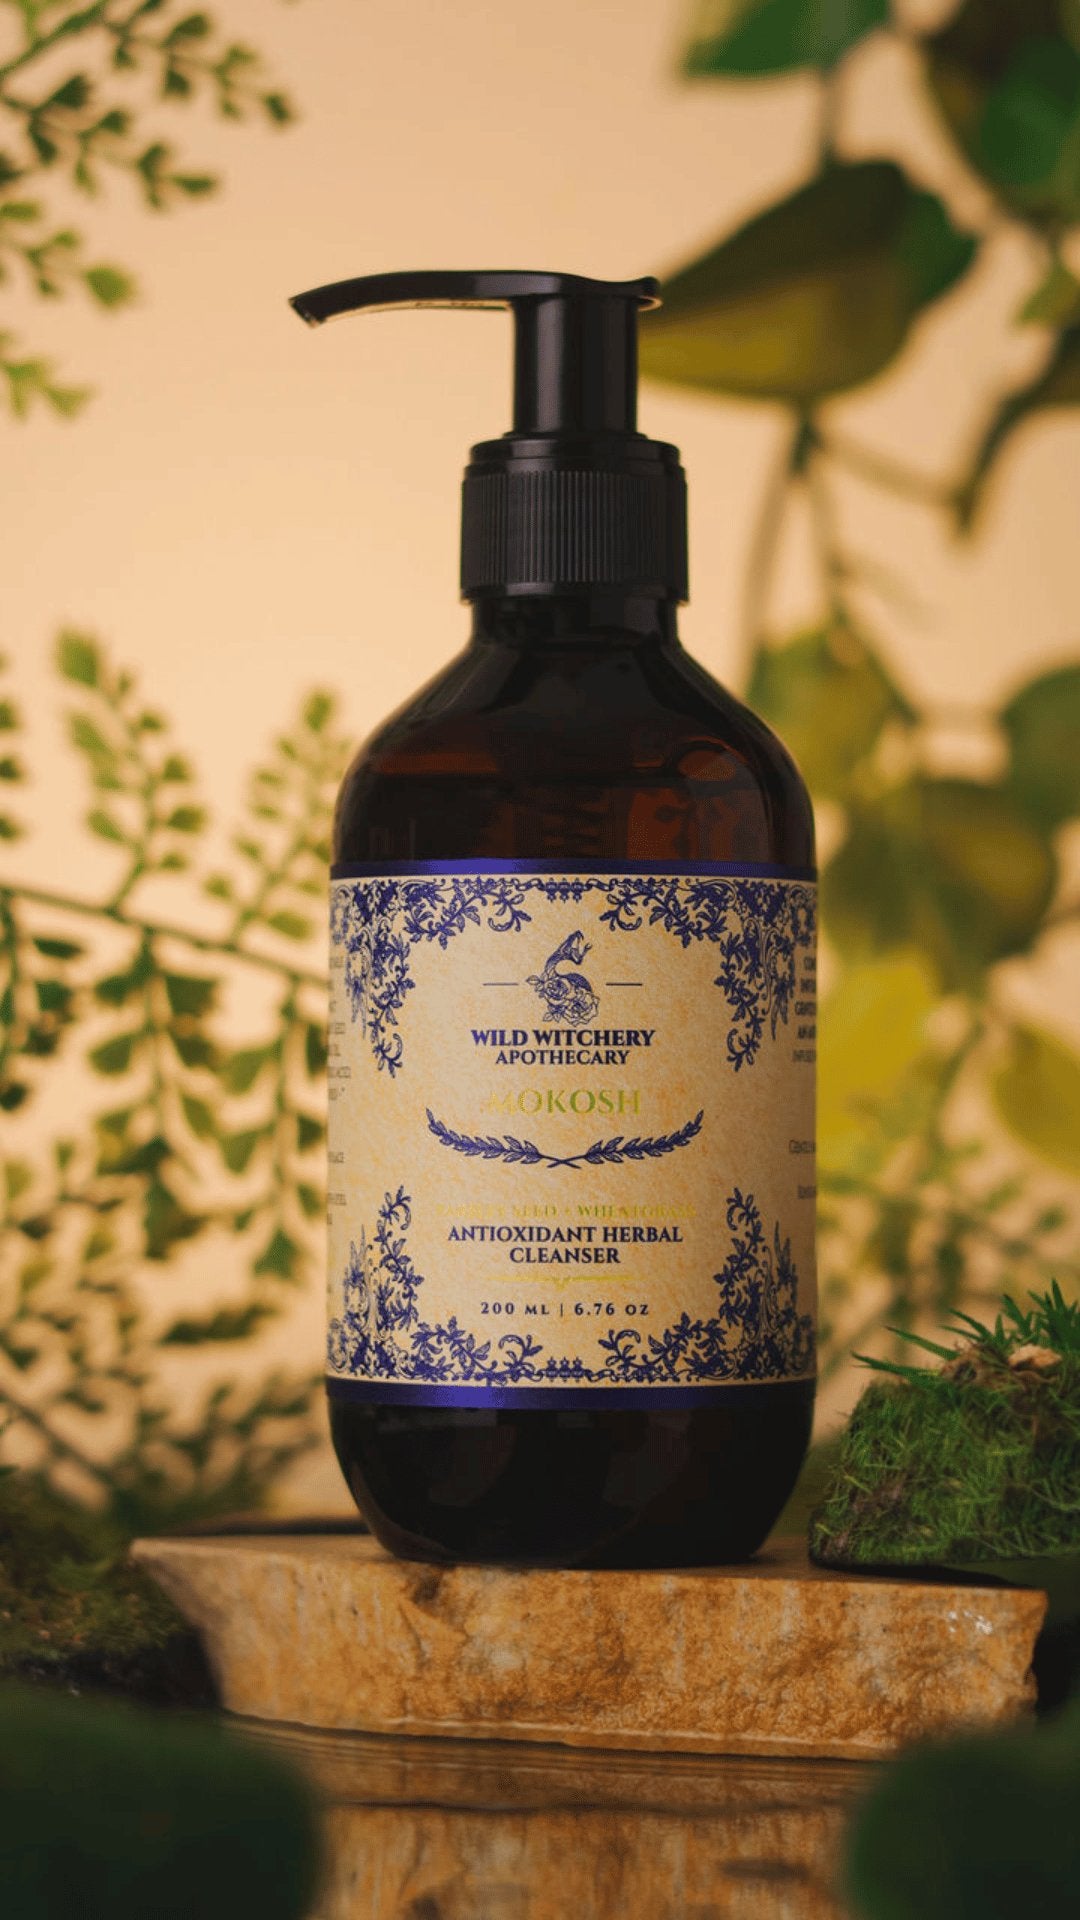 Herbal Gel Face Cleanser - Wild Witchery Apothecary